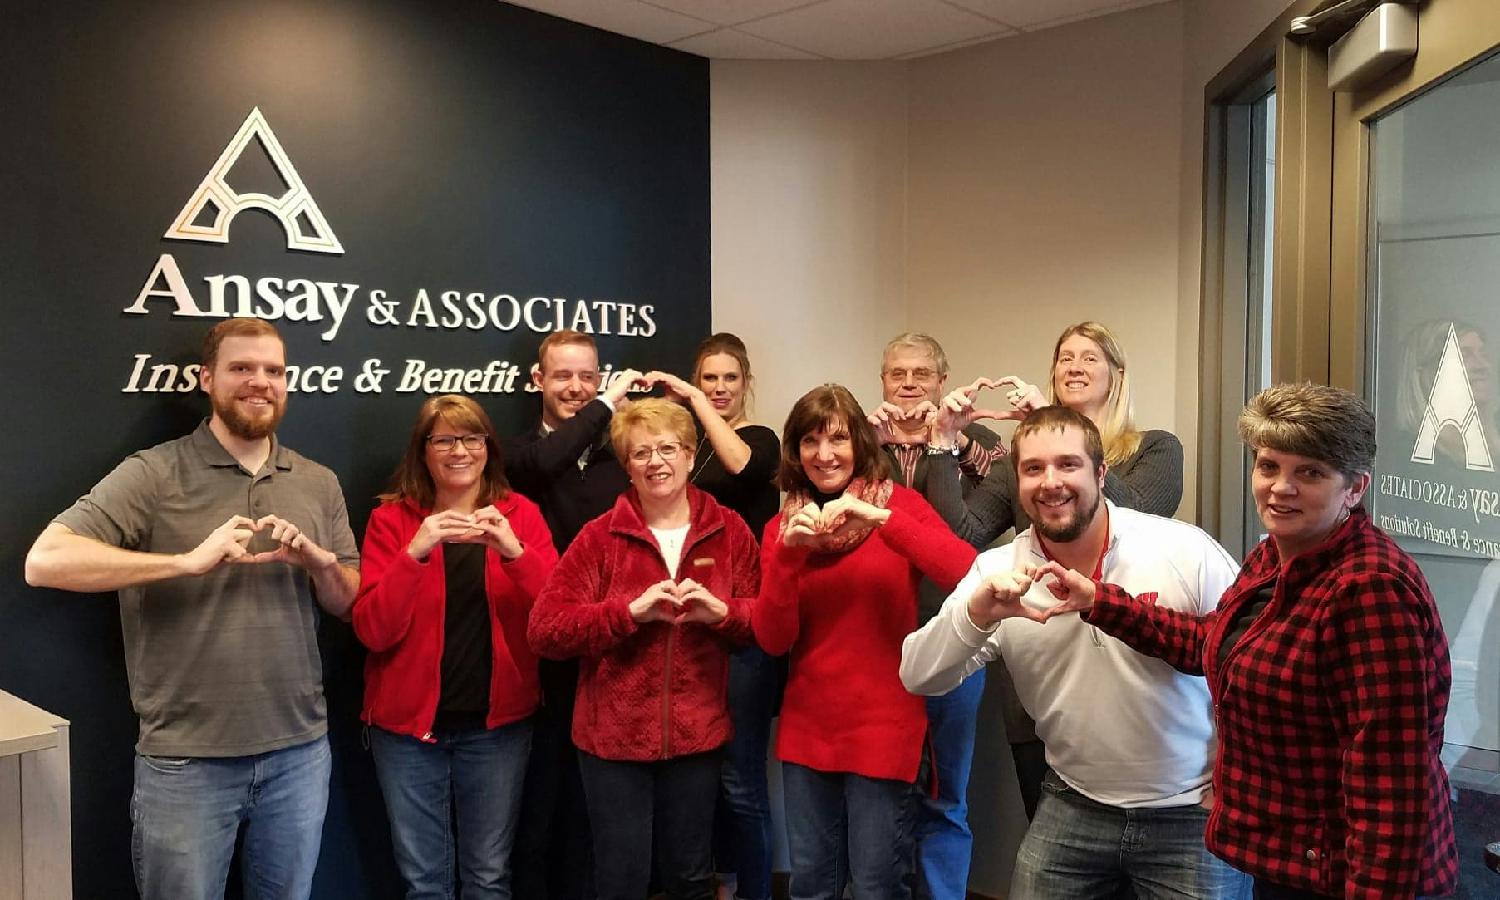 Madison office team showing their Ansay love on Wear Red Day!